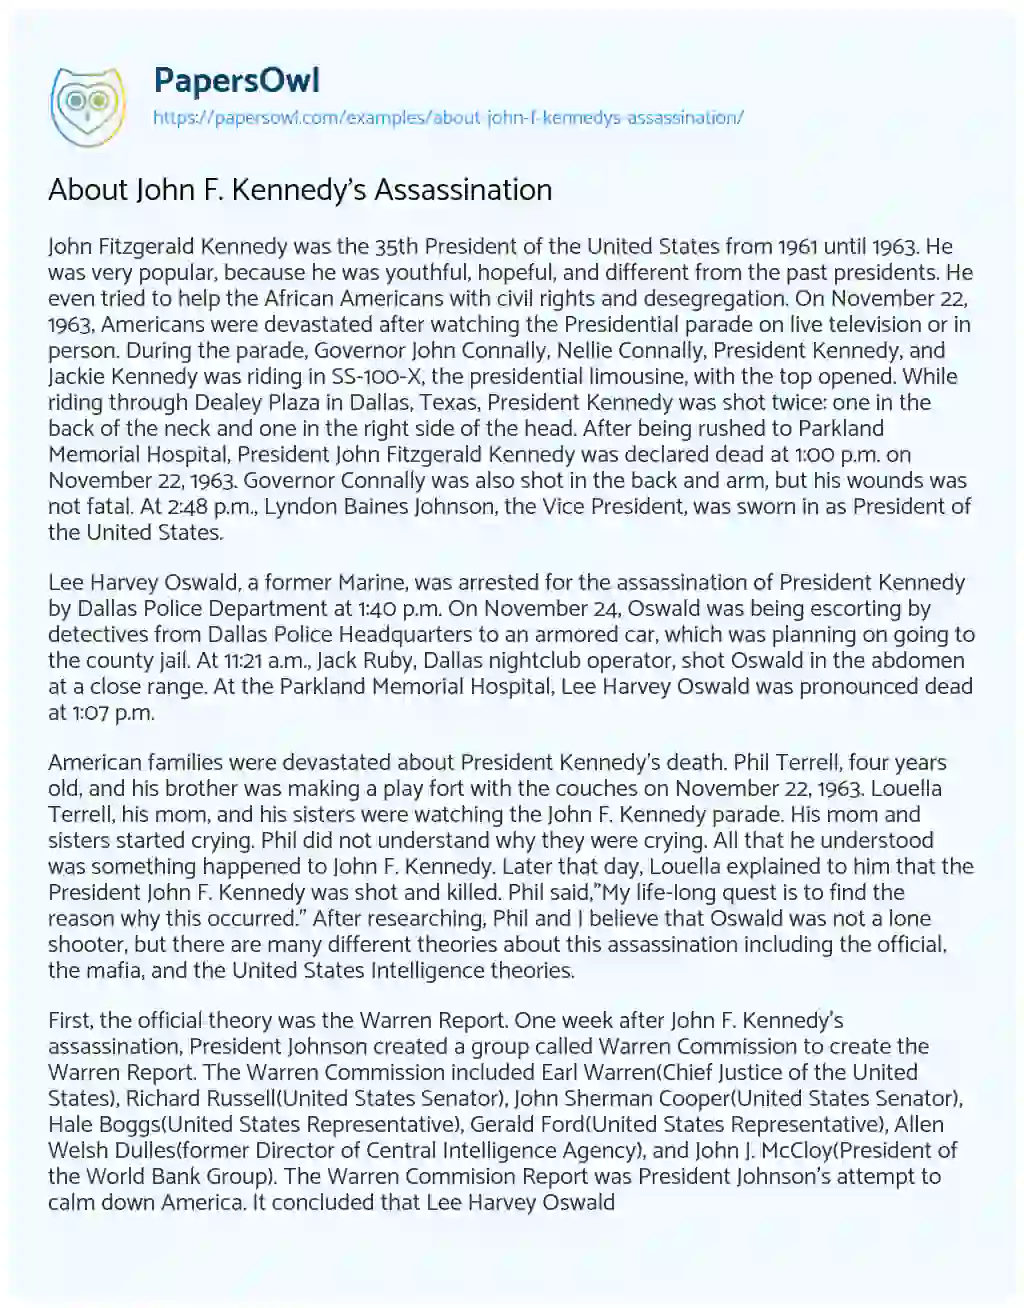 Essay on About John F. Kennedy’s Assassination